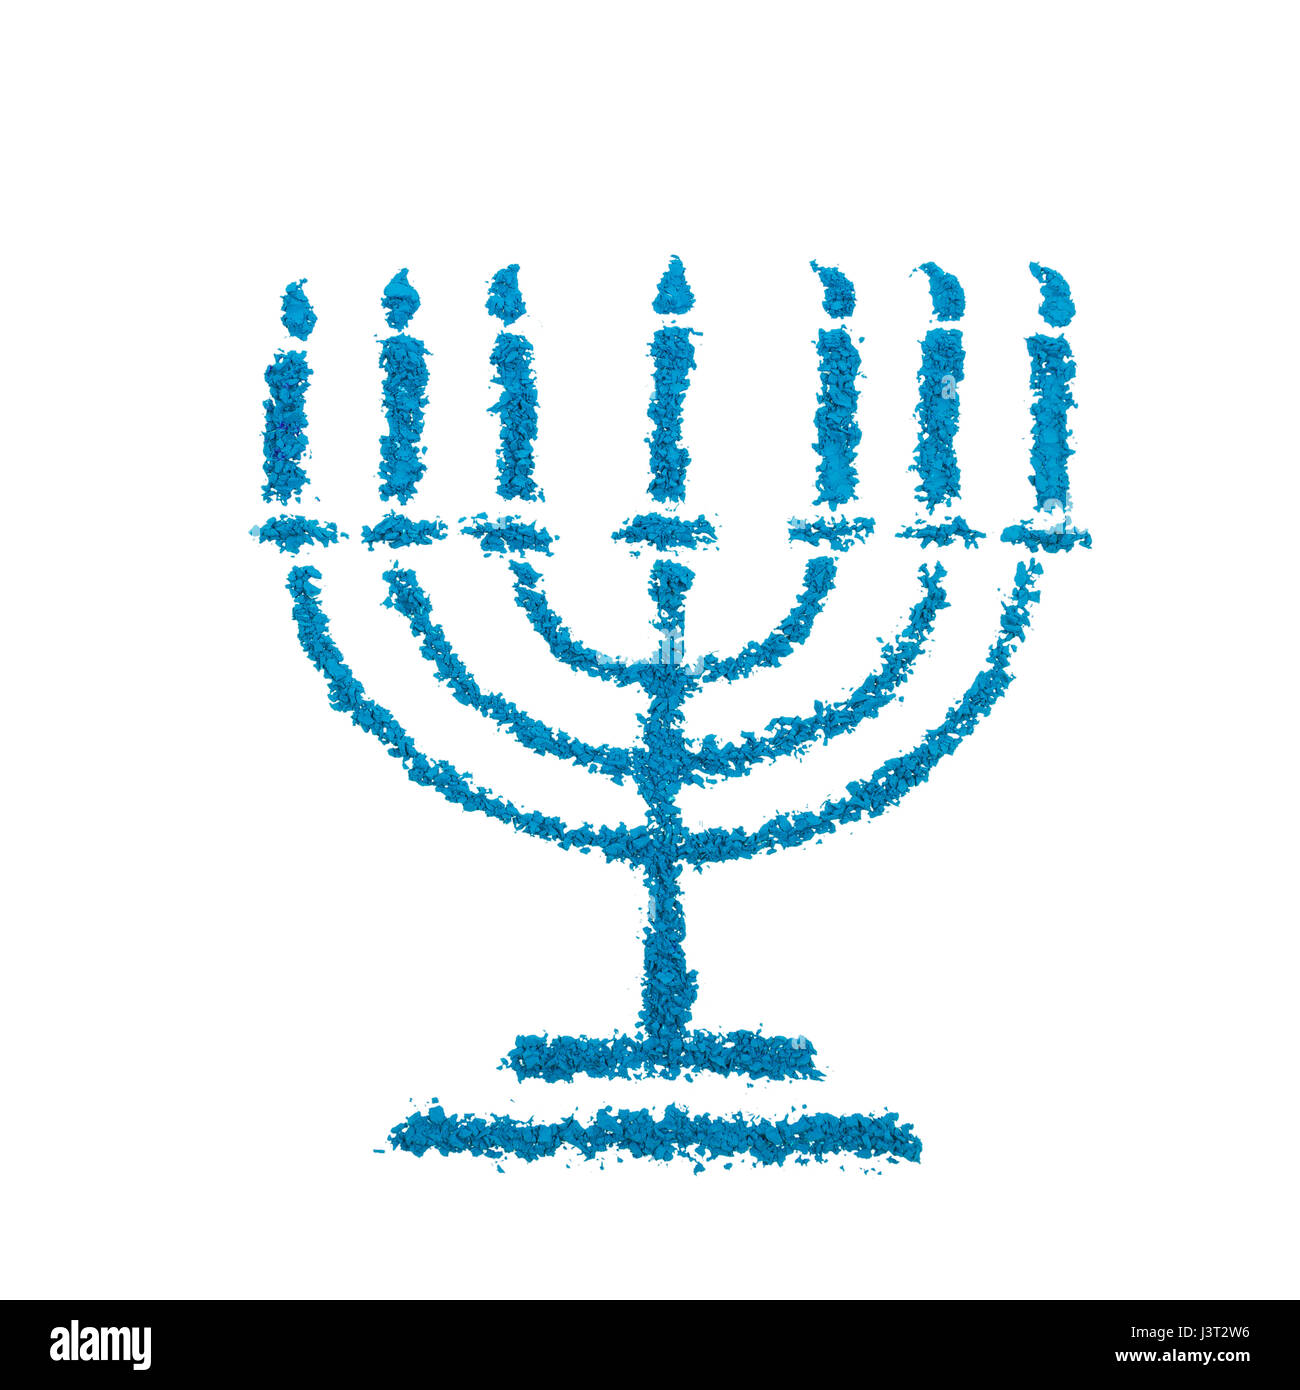 Jewish Hanukkah Menorah symbol made with color powder, isolated on a white background Stock Photo